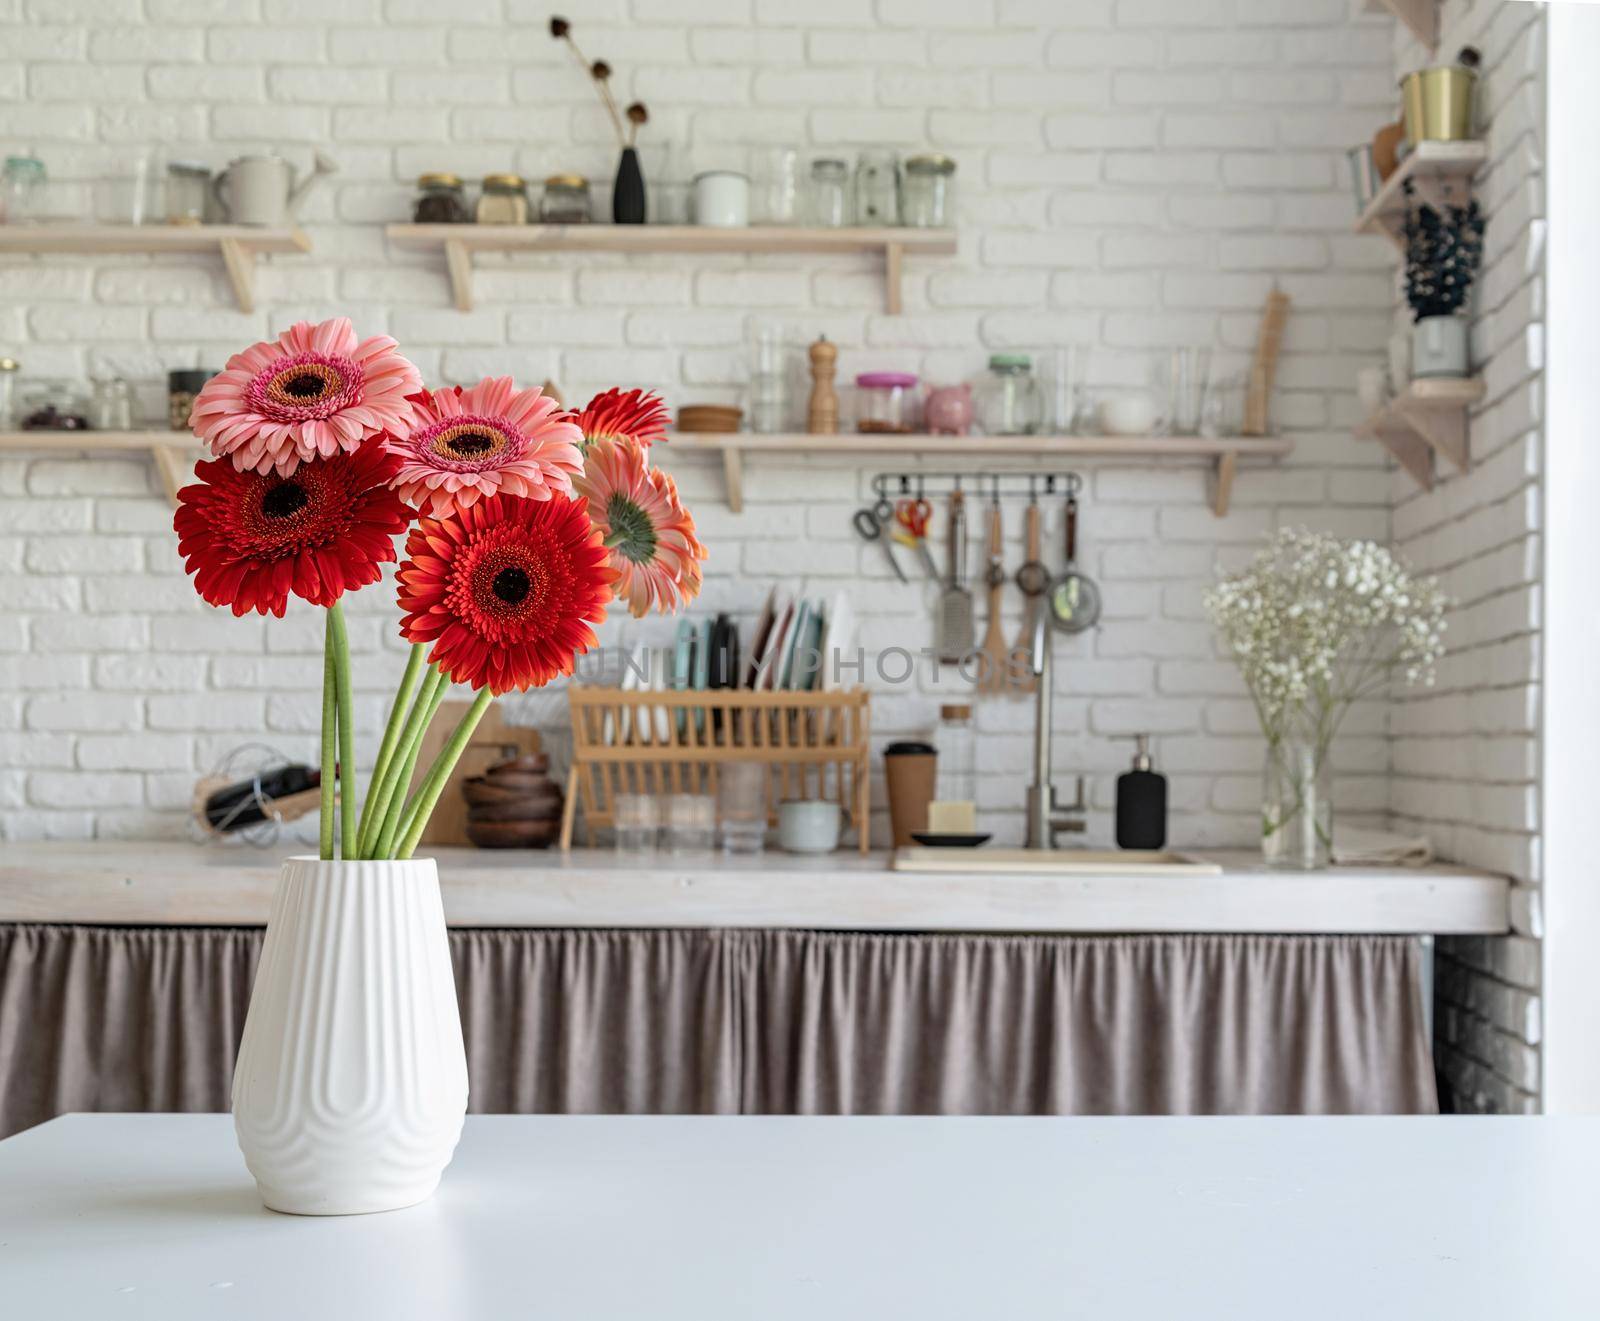 Rustic kitchen interior with white brick wall and white wooden shelves. Fresh gerbera flowers